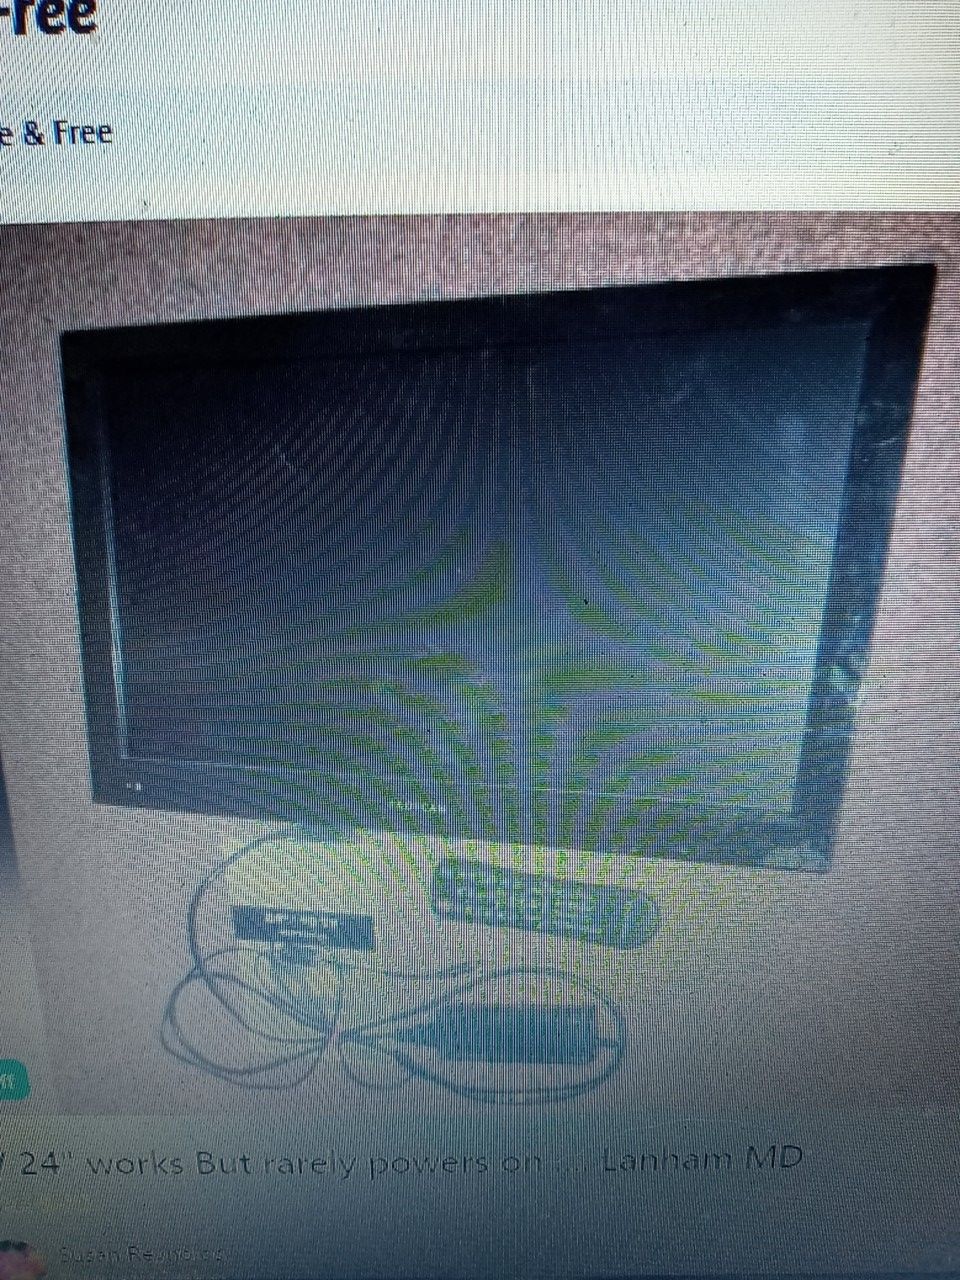 24" TV. Works but rarely powers on